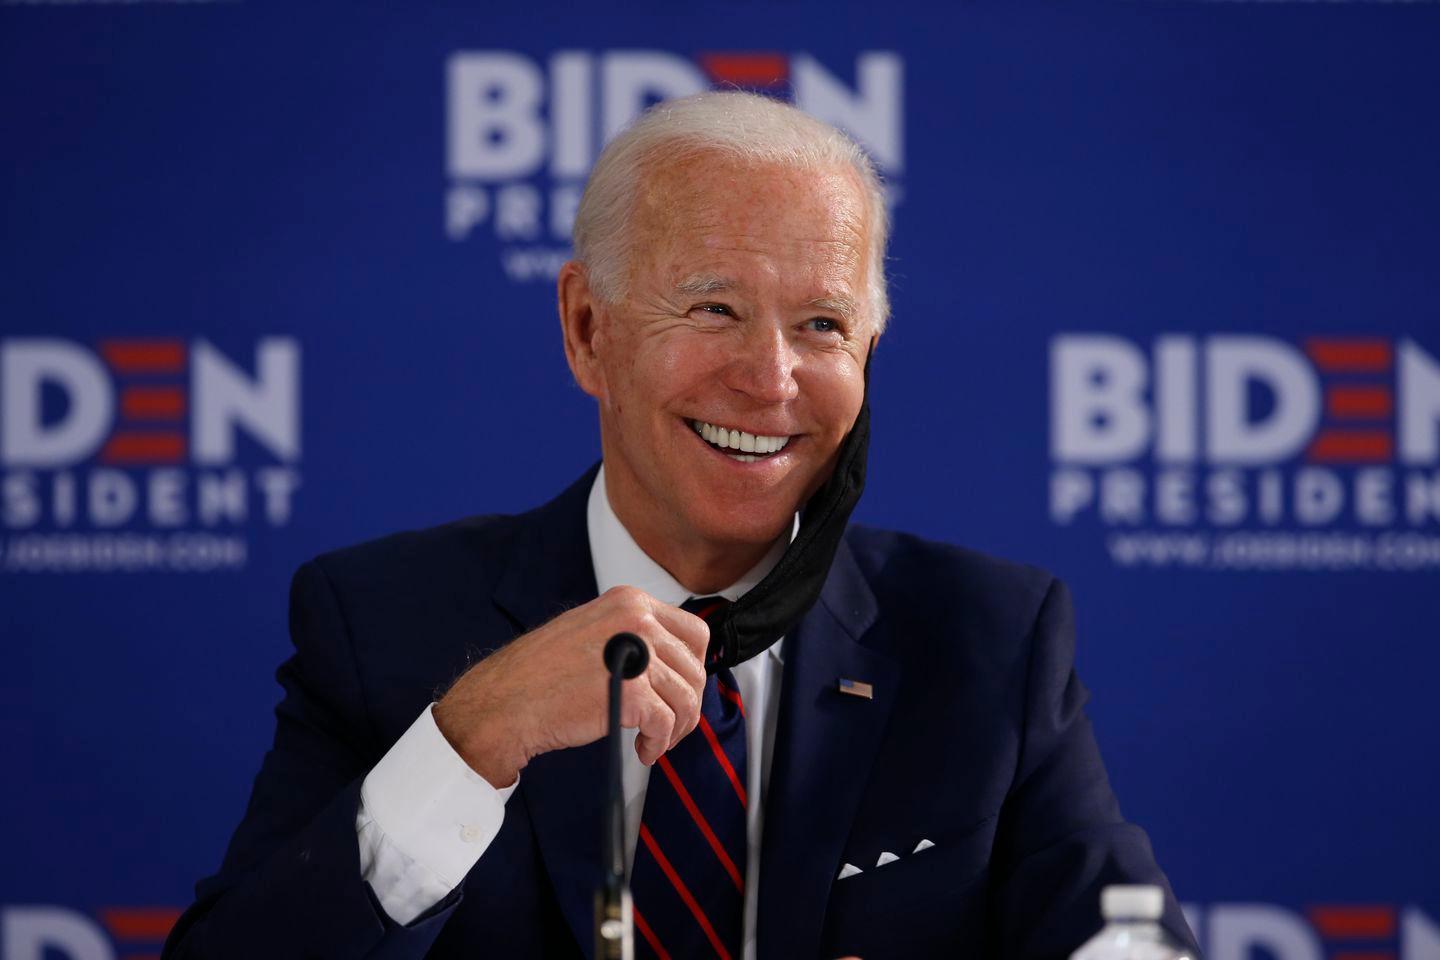 Biden's first call was to Canadian Prime Minister Justin Trudeau - Avaz